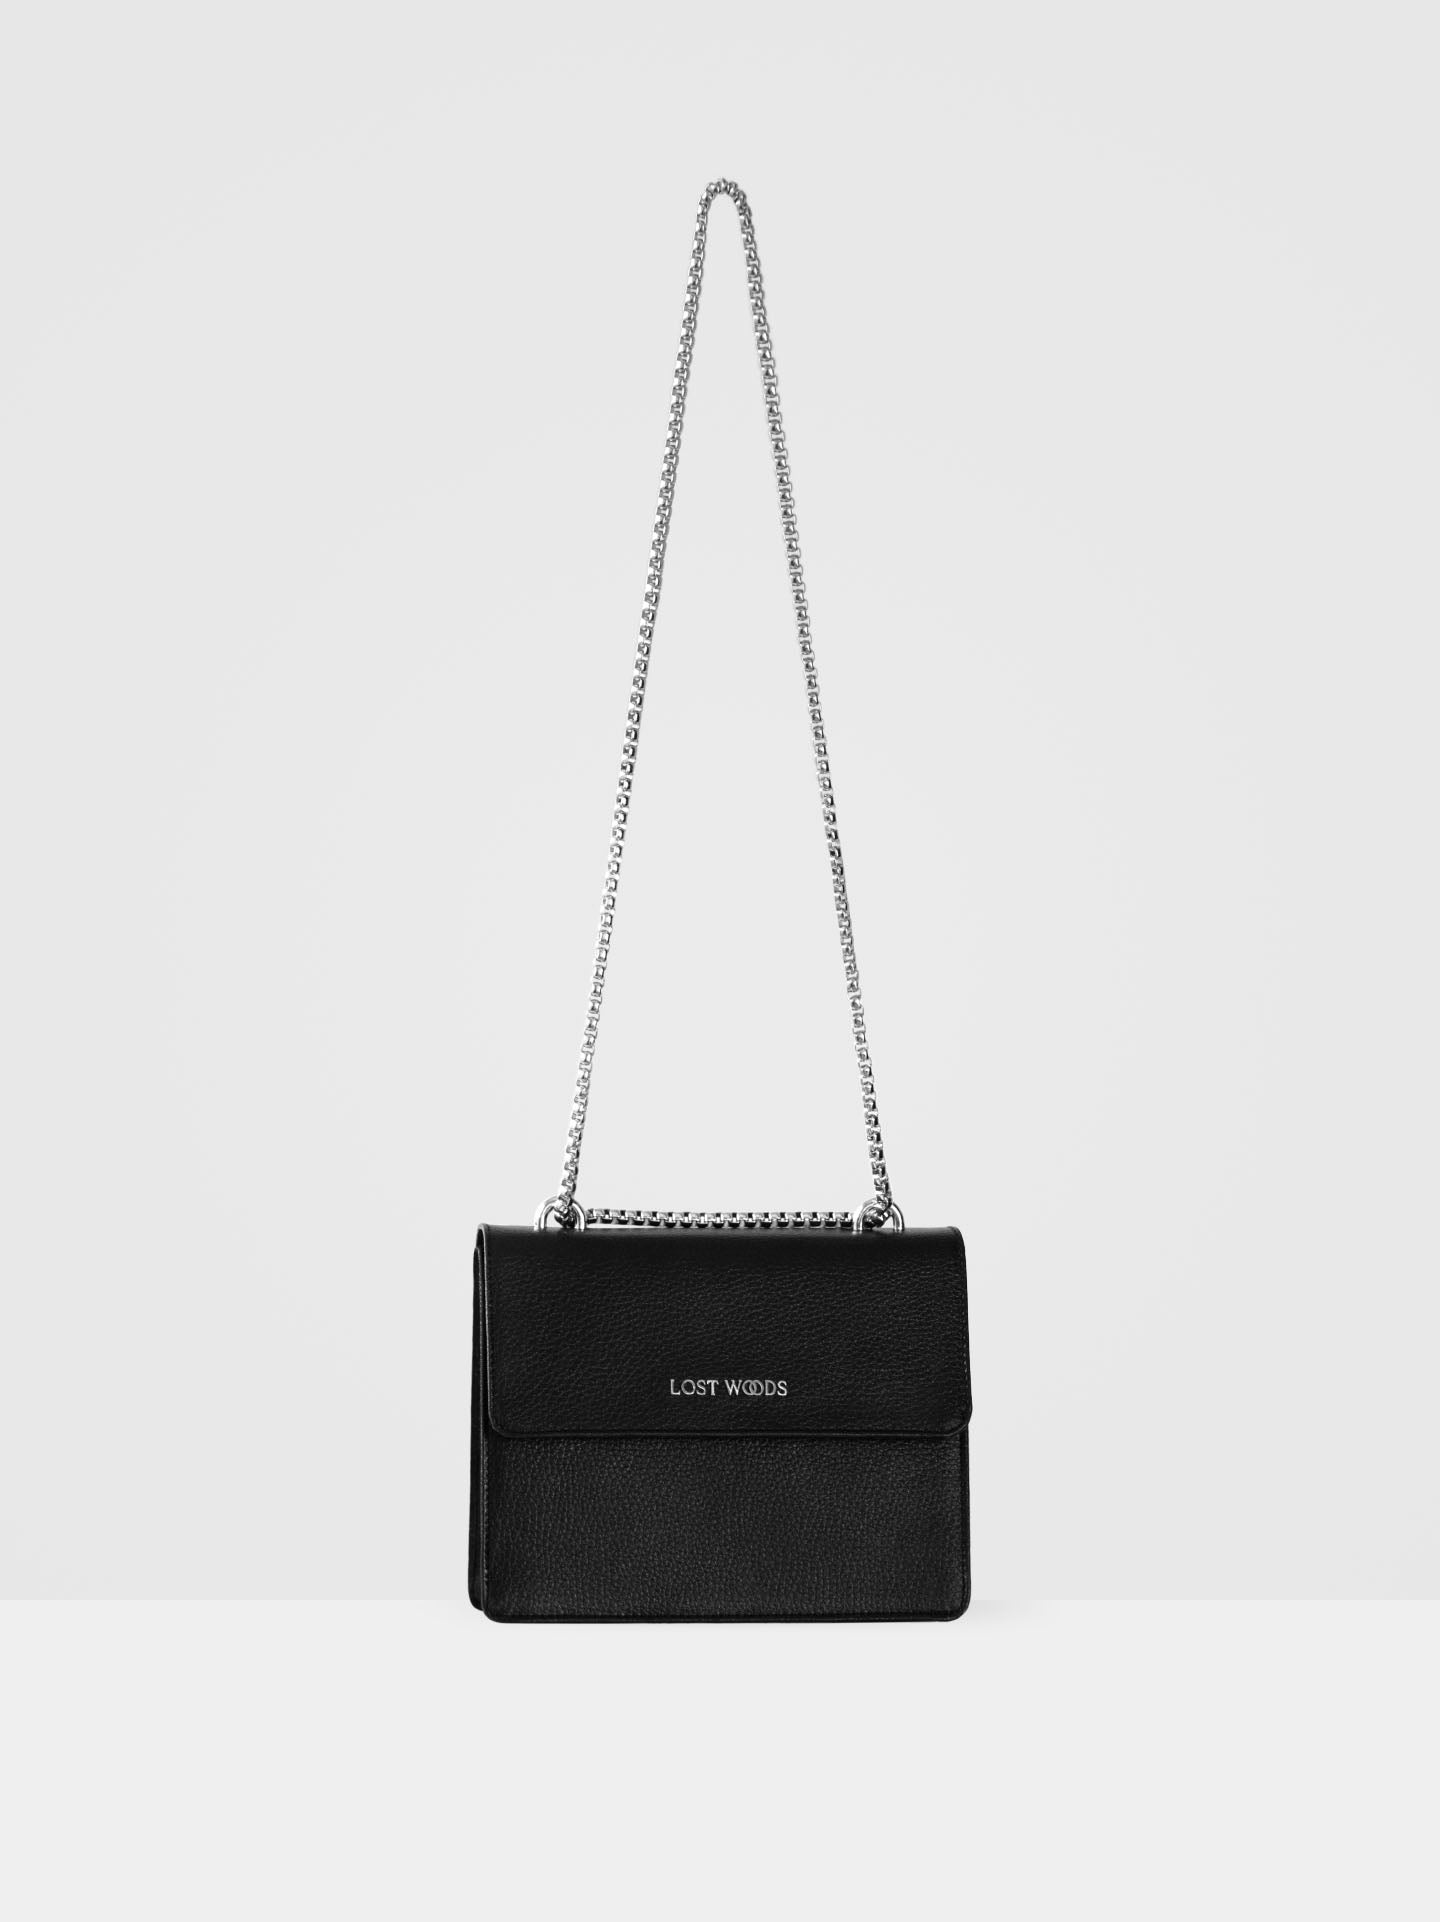 Willow Chain Bag in Black & Silver